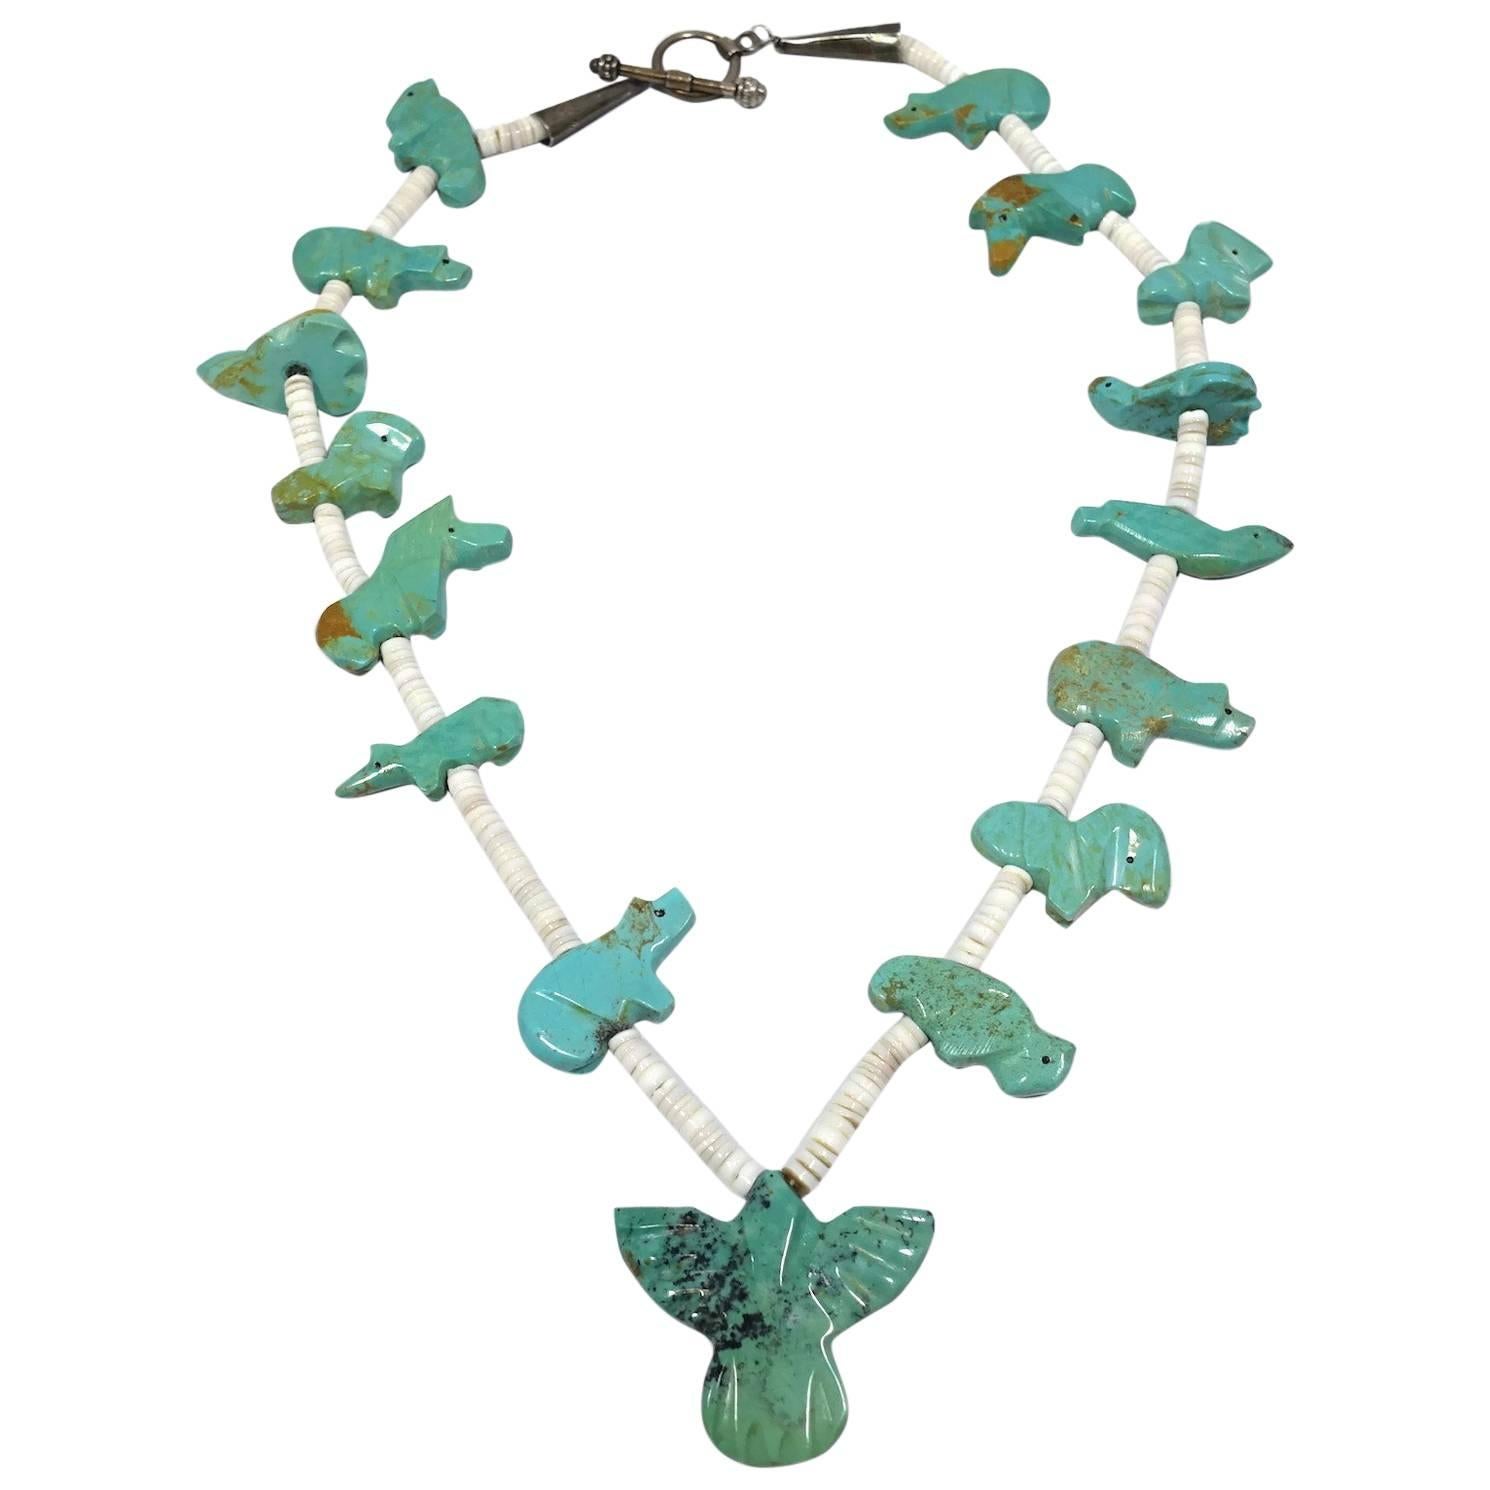 RARE 1930s Vintage Turquoise Large Fetish Necklace For Sale